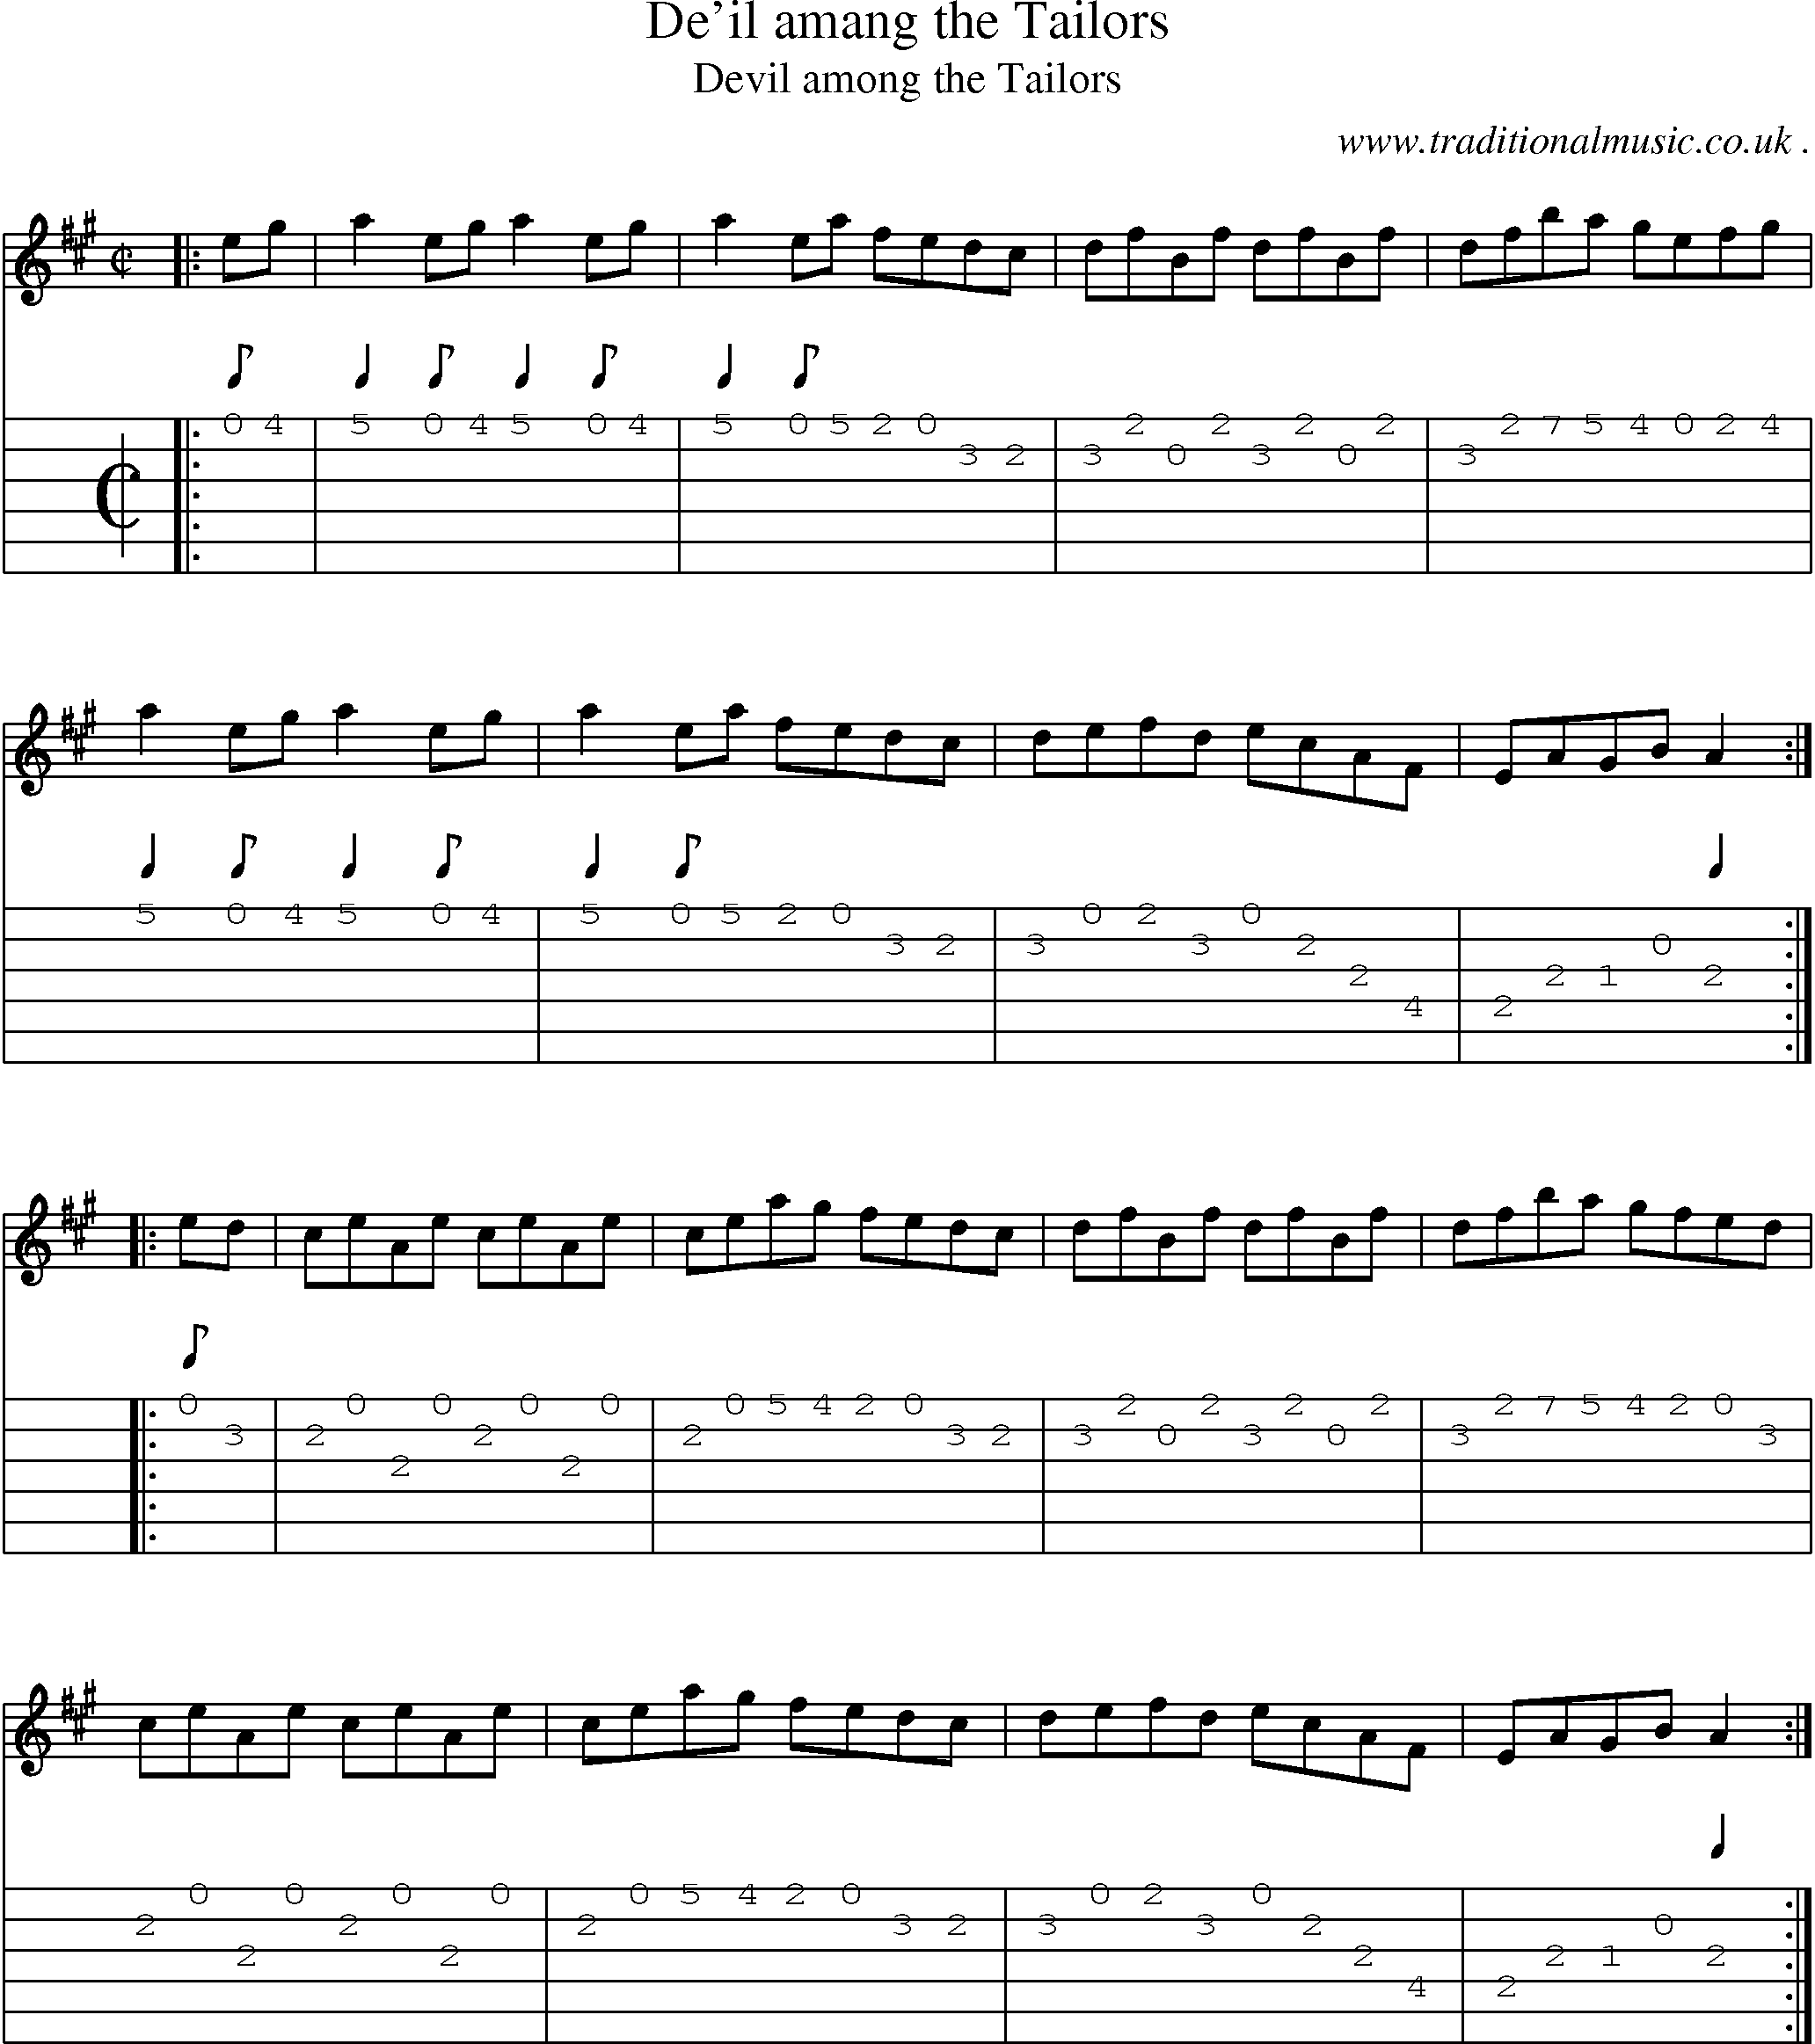 Sheet-Music and Guitar Tabs for Deil Amang The Tailors